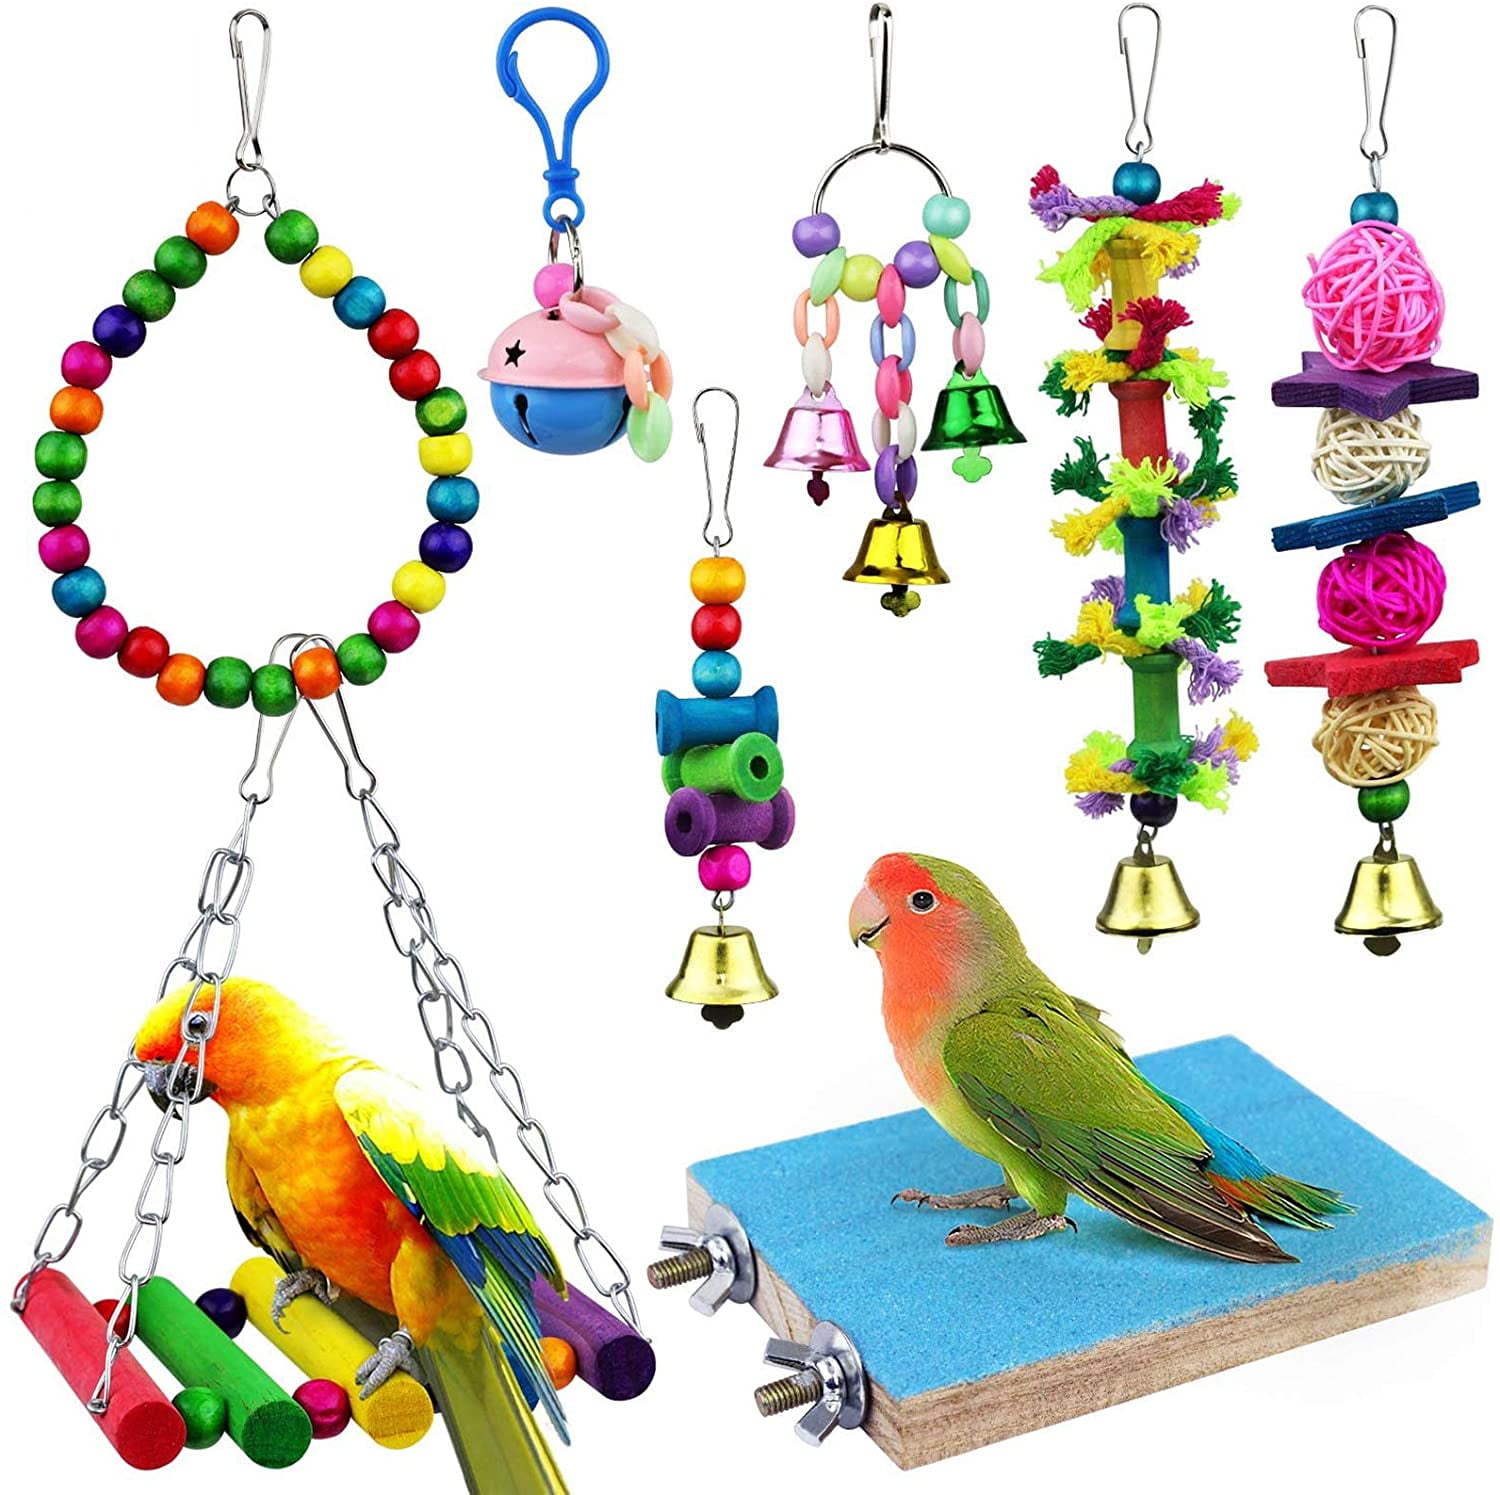 Finches Macaws Conures Parrots cmboom Bird Parrot Toys Budgie Toy Hanging Bell Pet Bird Cage Hammock Swing Toy Hanging Toy for Small Parakeets Cockatiels Love Birds 